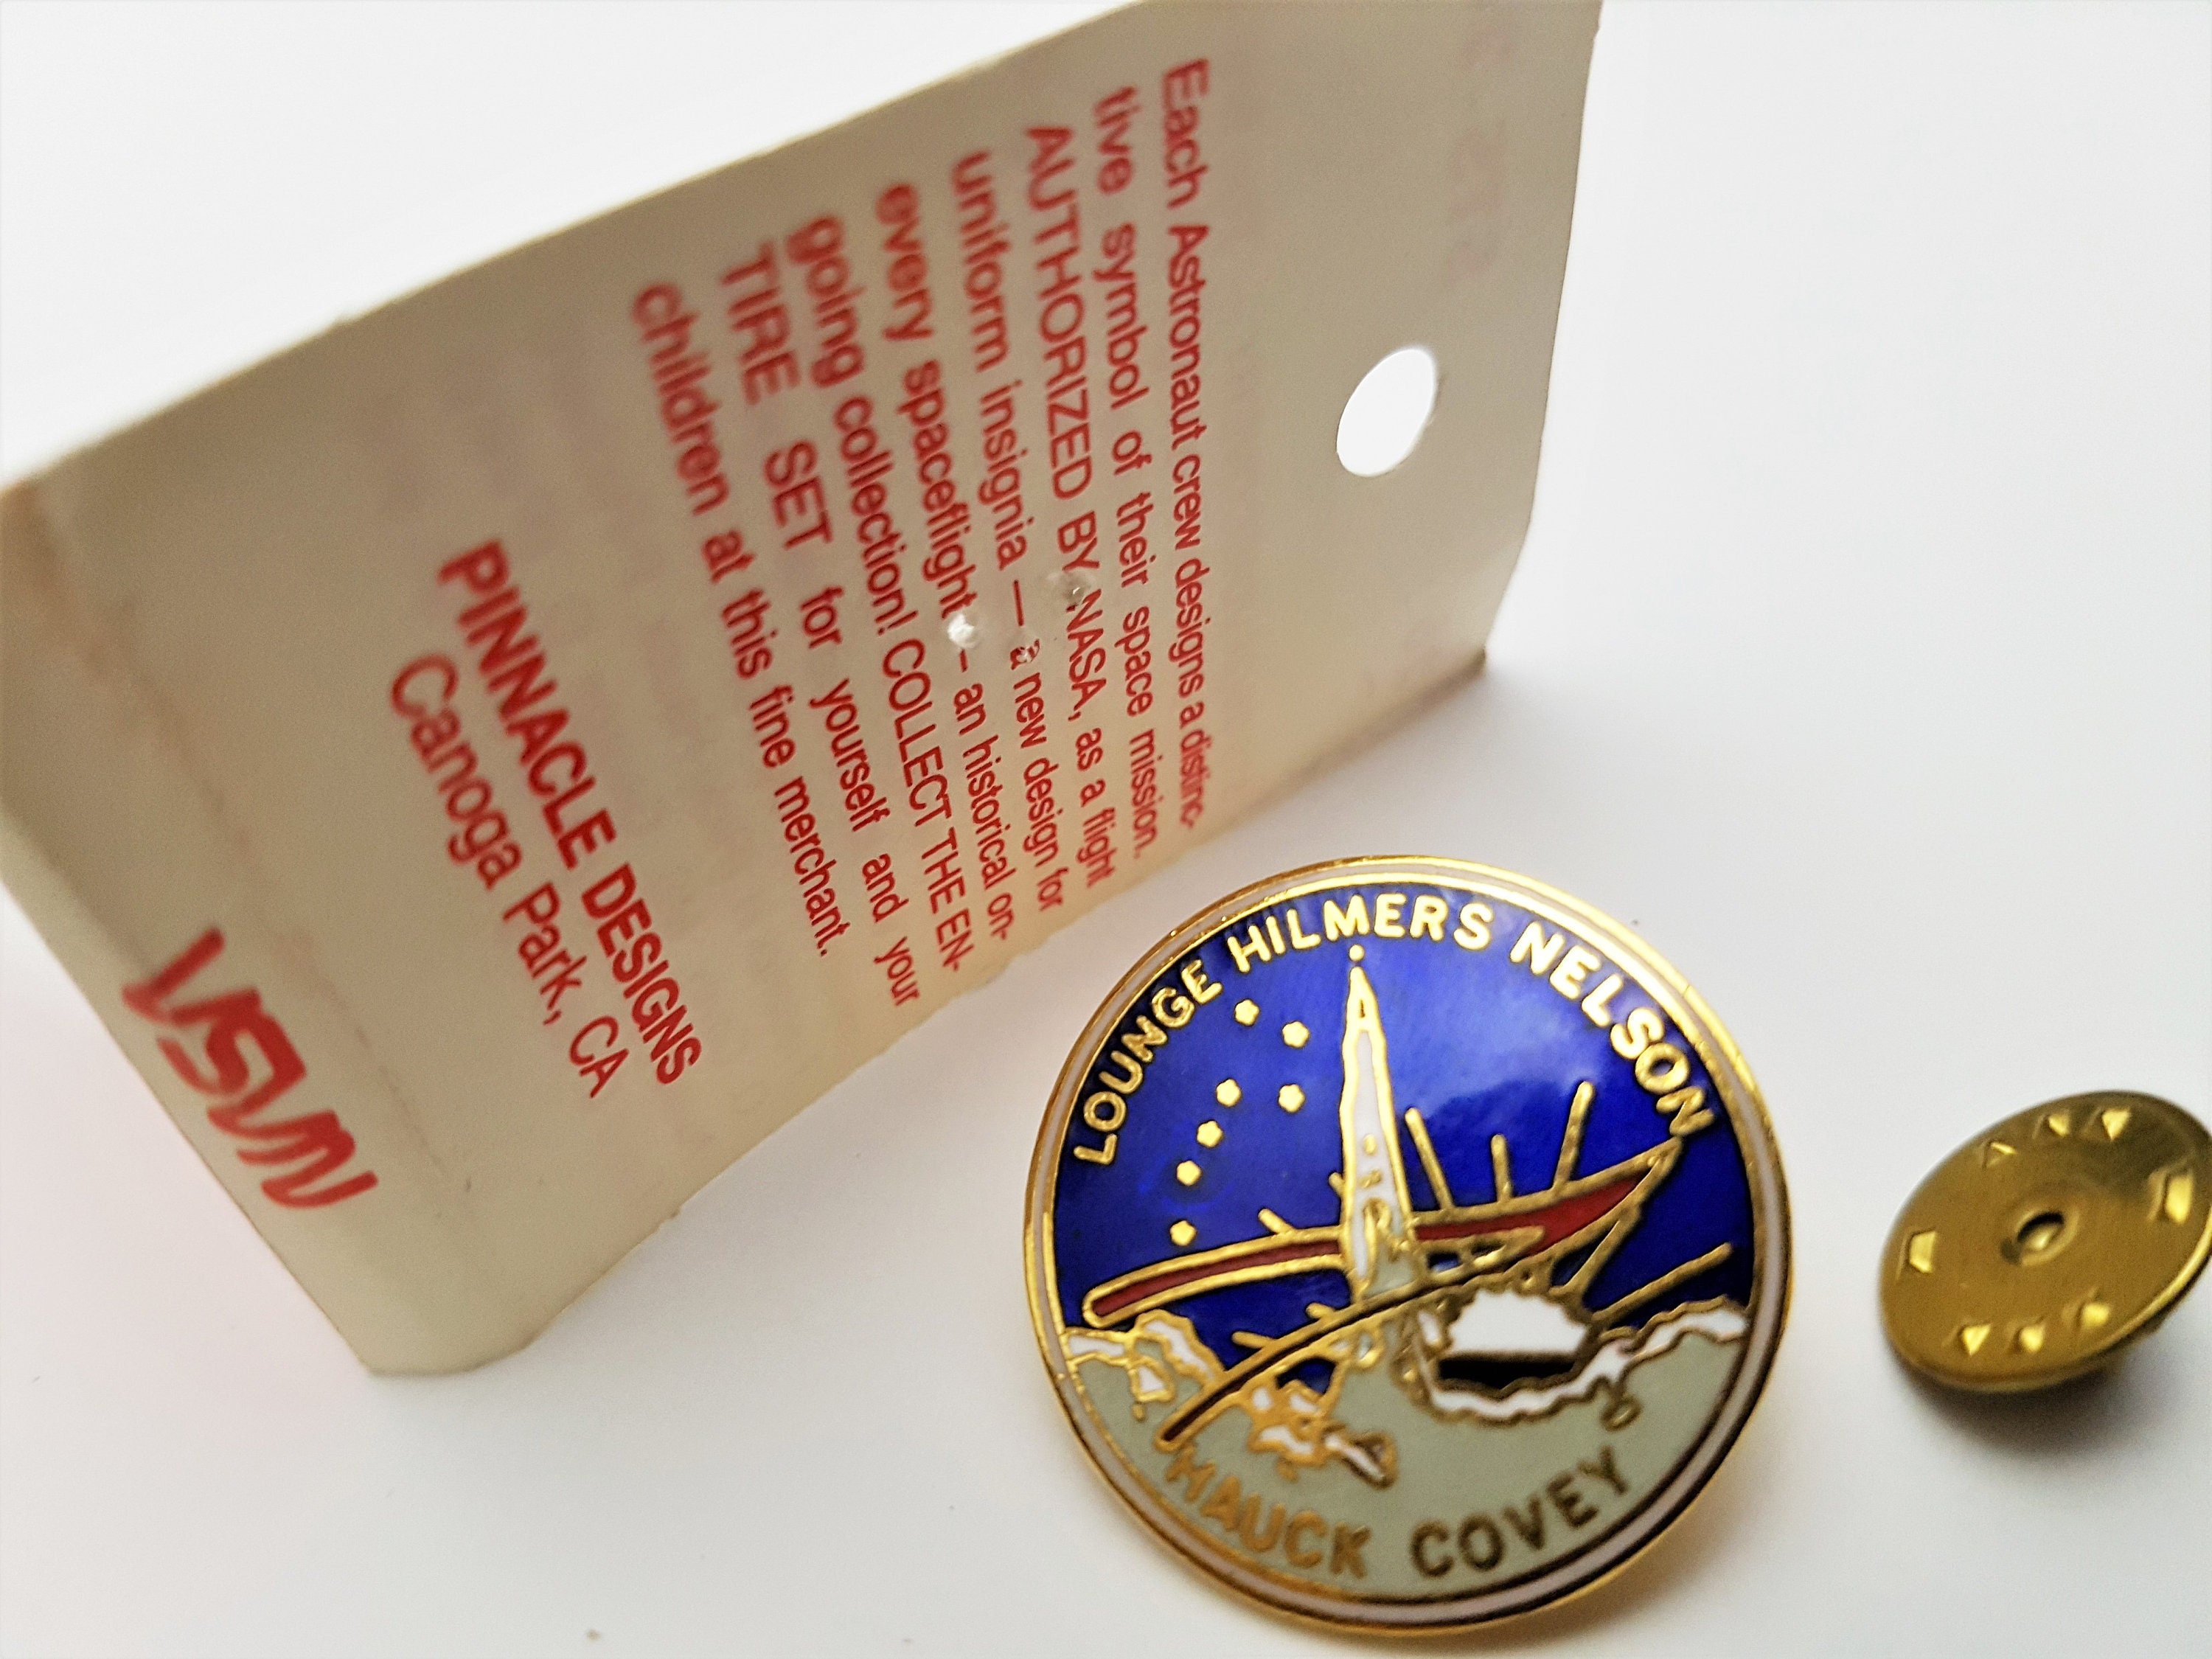 RARE NASA Collectable Space Shuttel STS 26 Mission Lapel Hat Pin Hauck Covey 